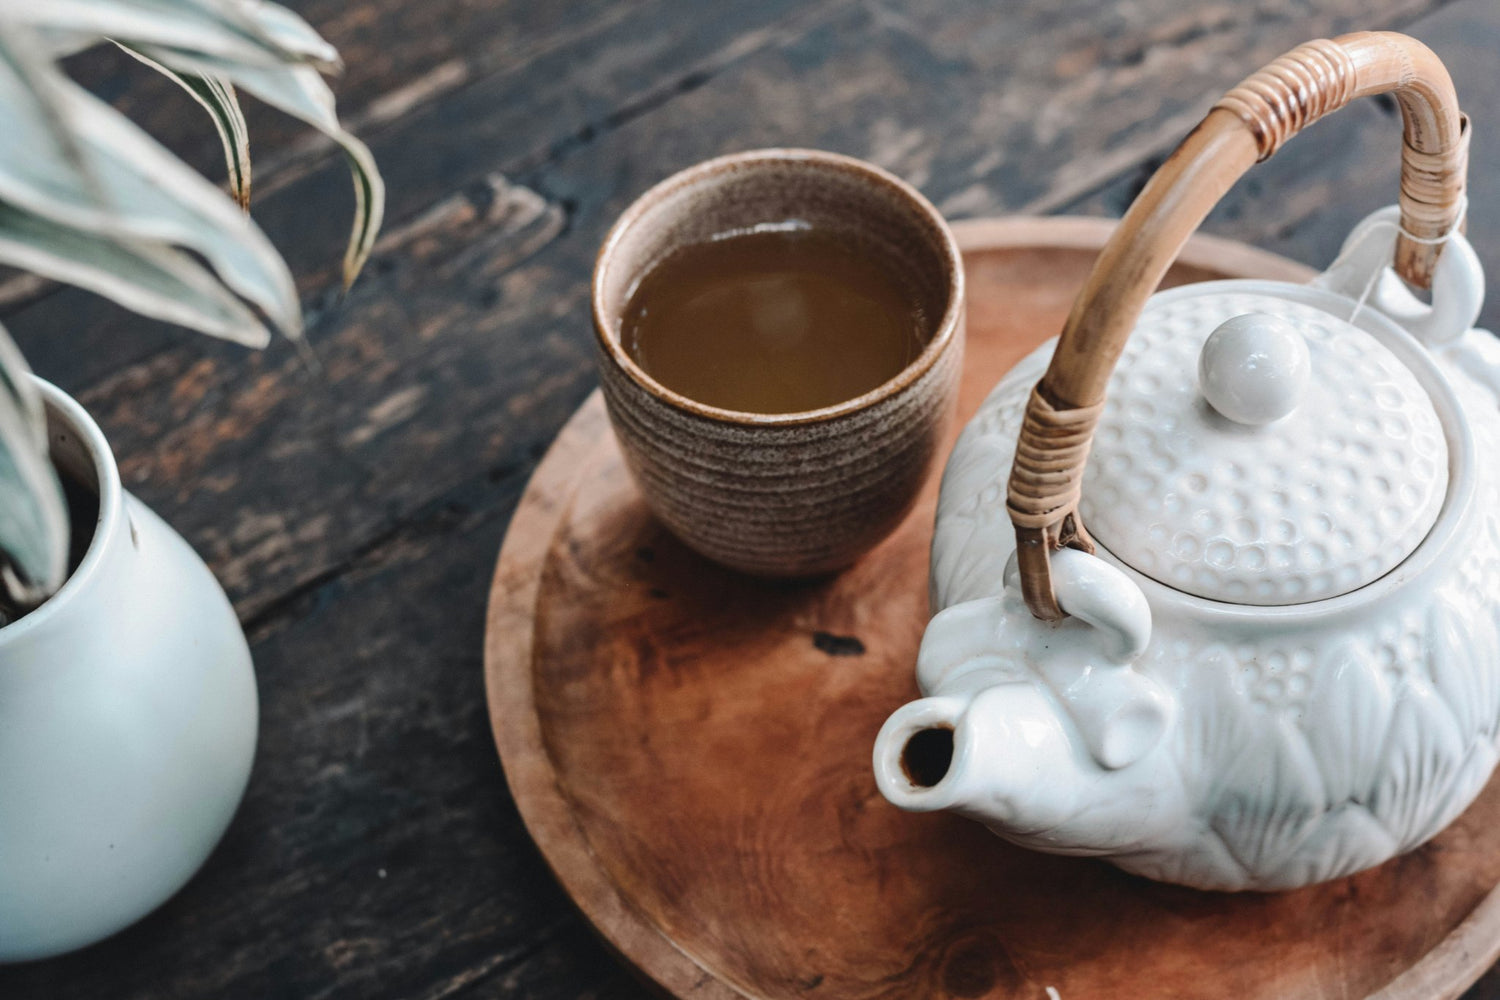 7 Herbal Teas That Energize Your Body Without Caffeine - Loose Leaf Tea Market